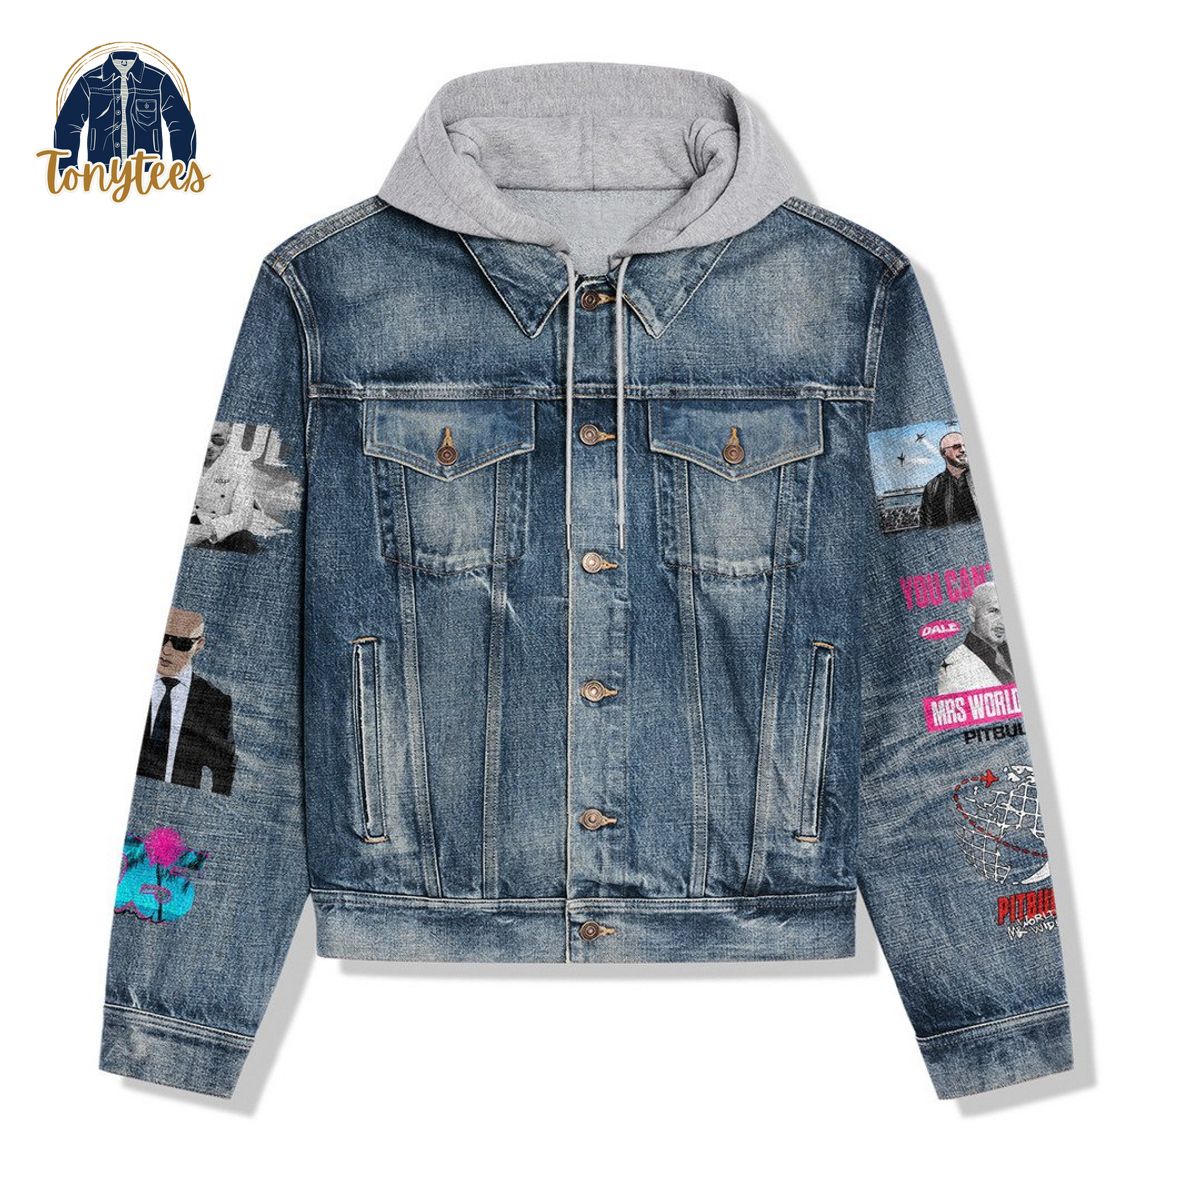 Pitbull Party After Dark Tour Hooded Denim Jacket